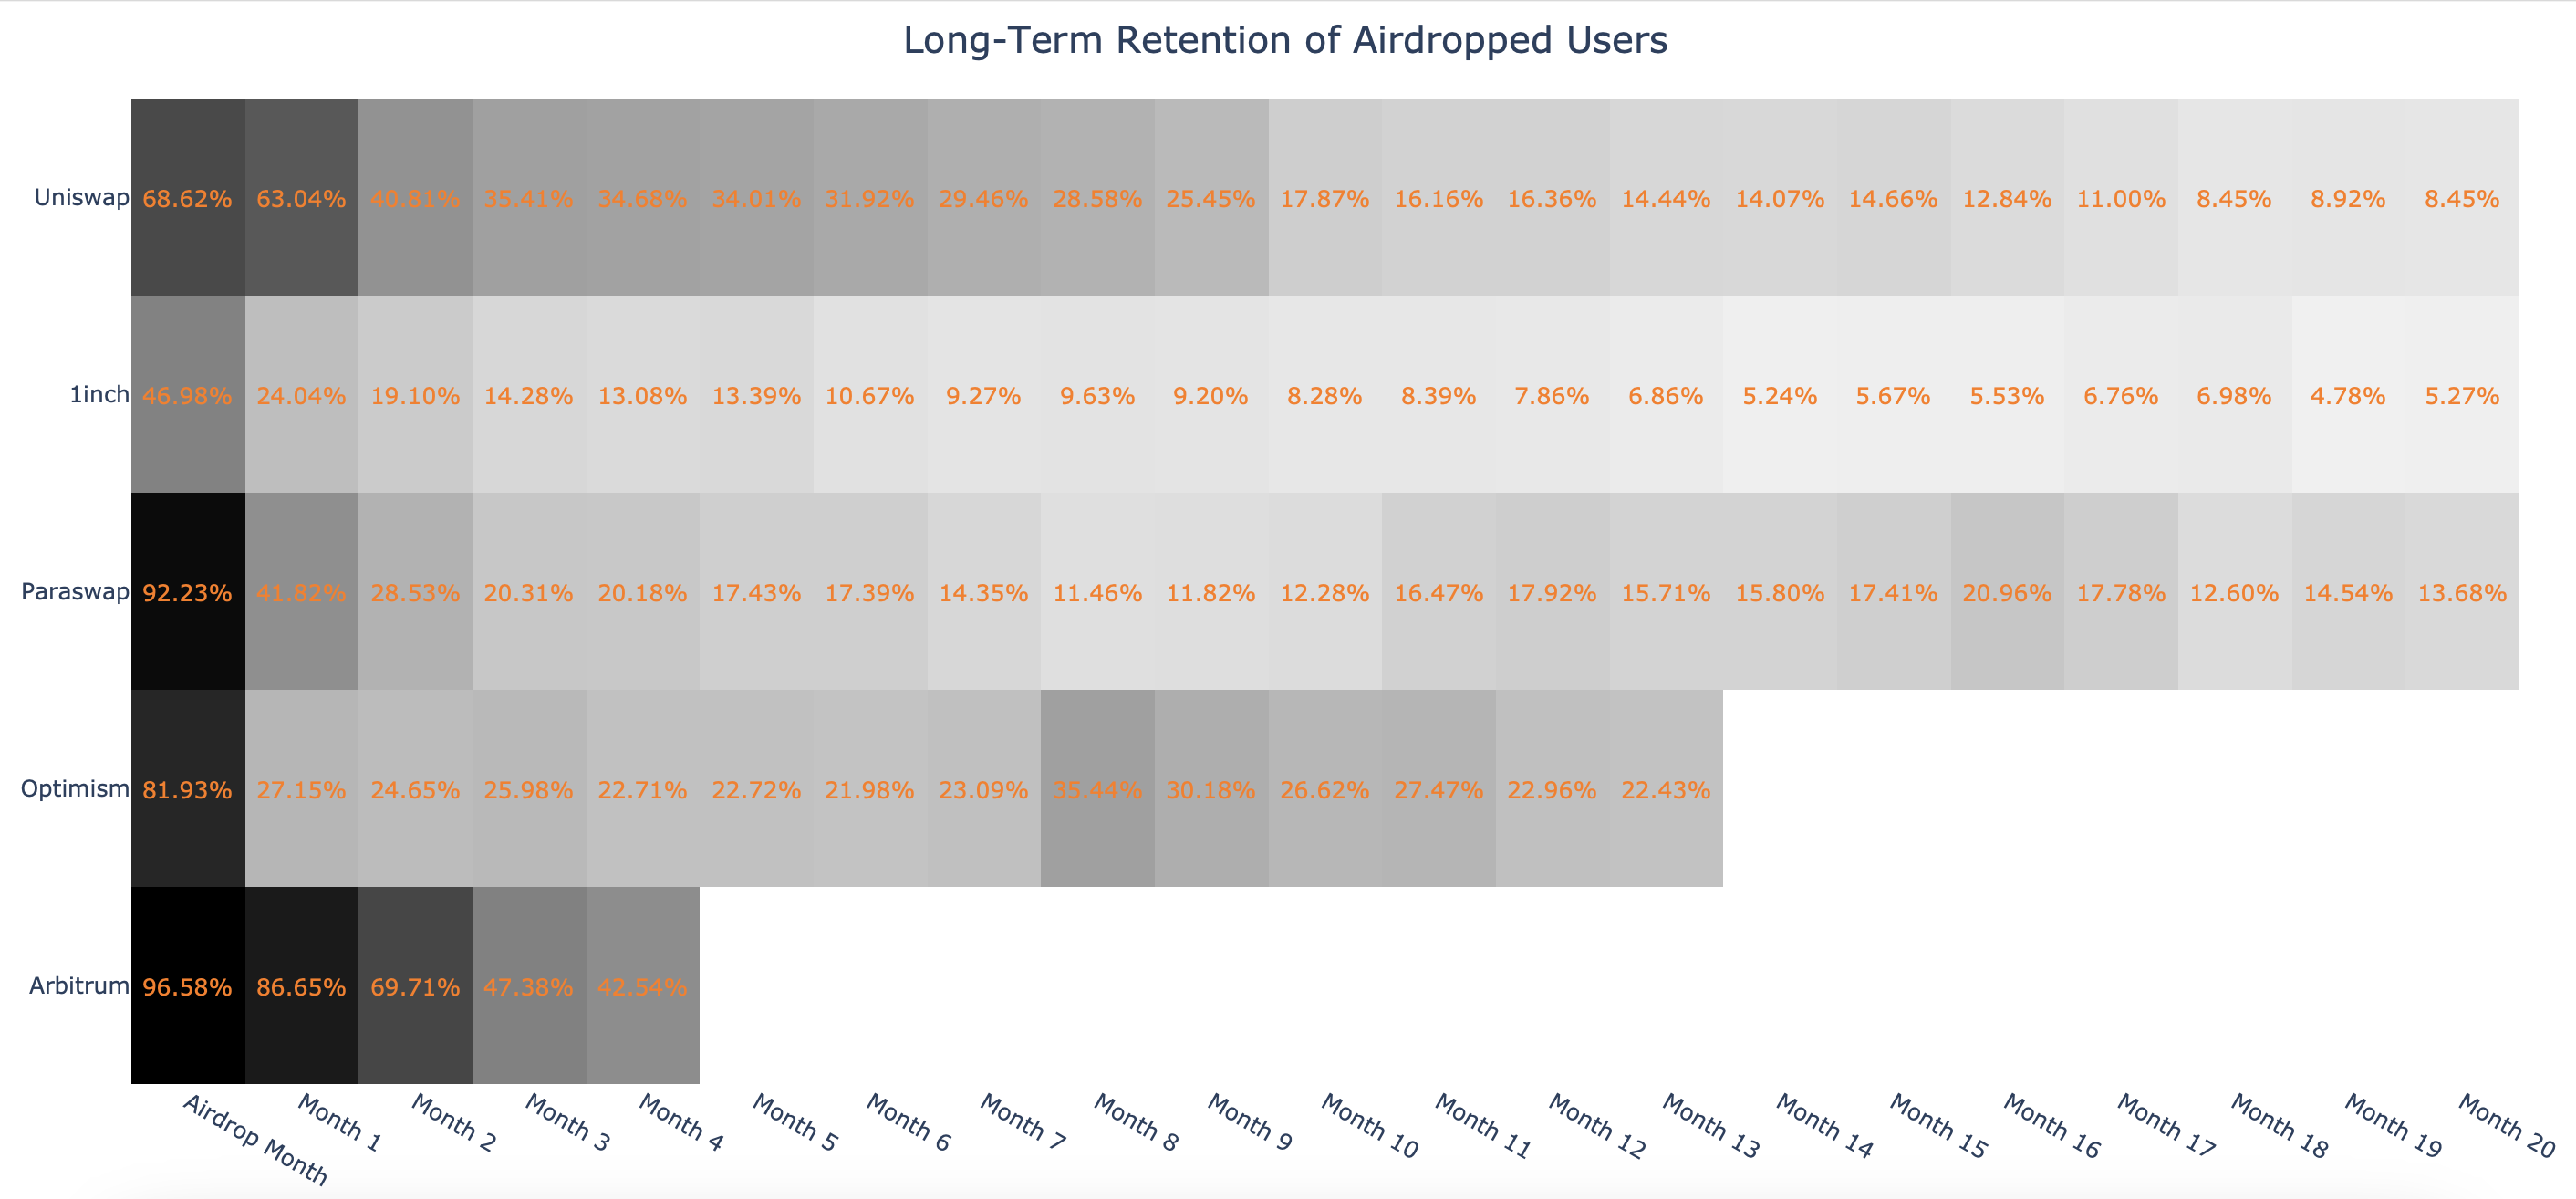 Arbitrum has one of the highest retention rate four months after its airdrop. 